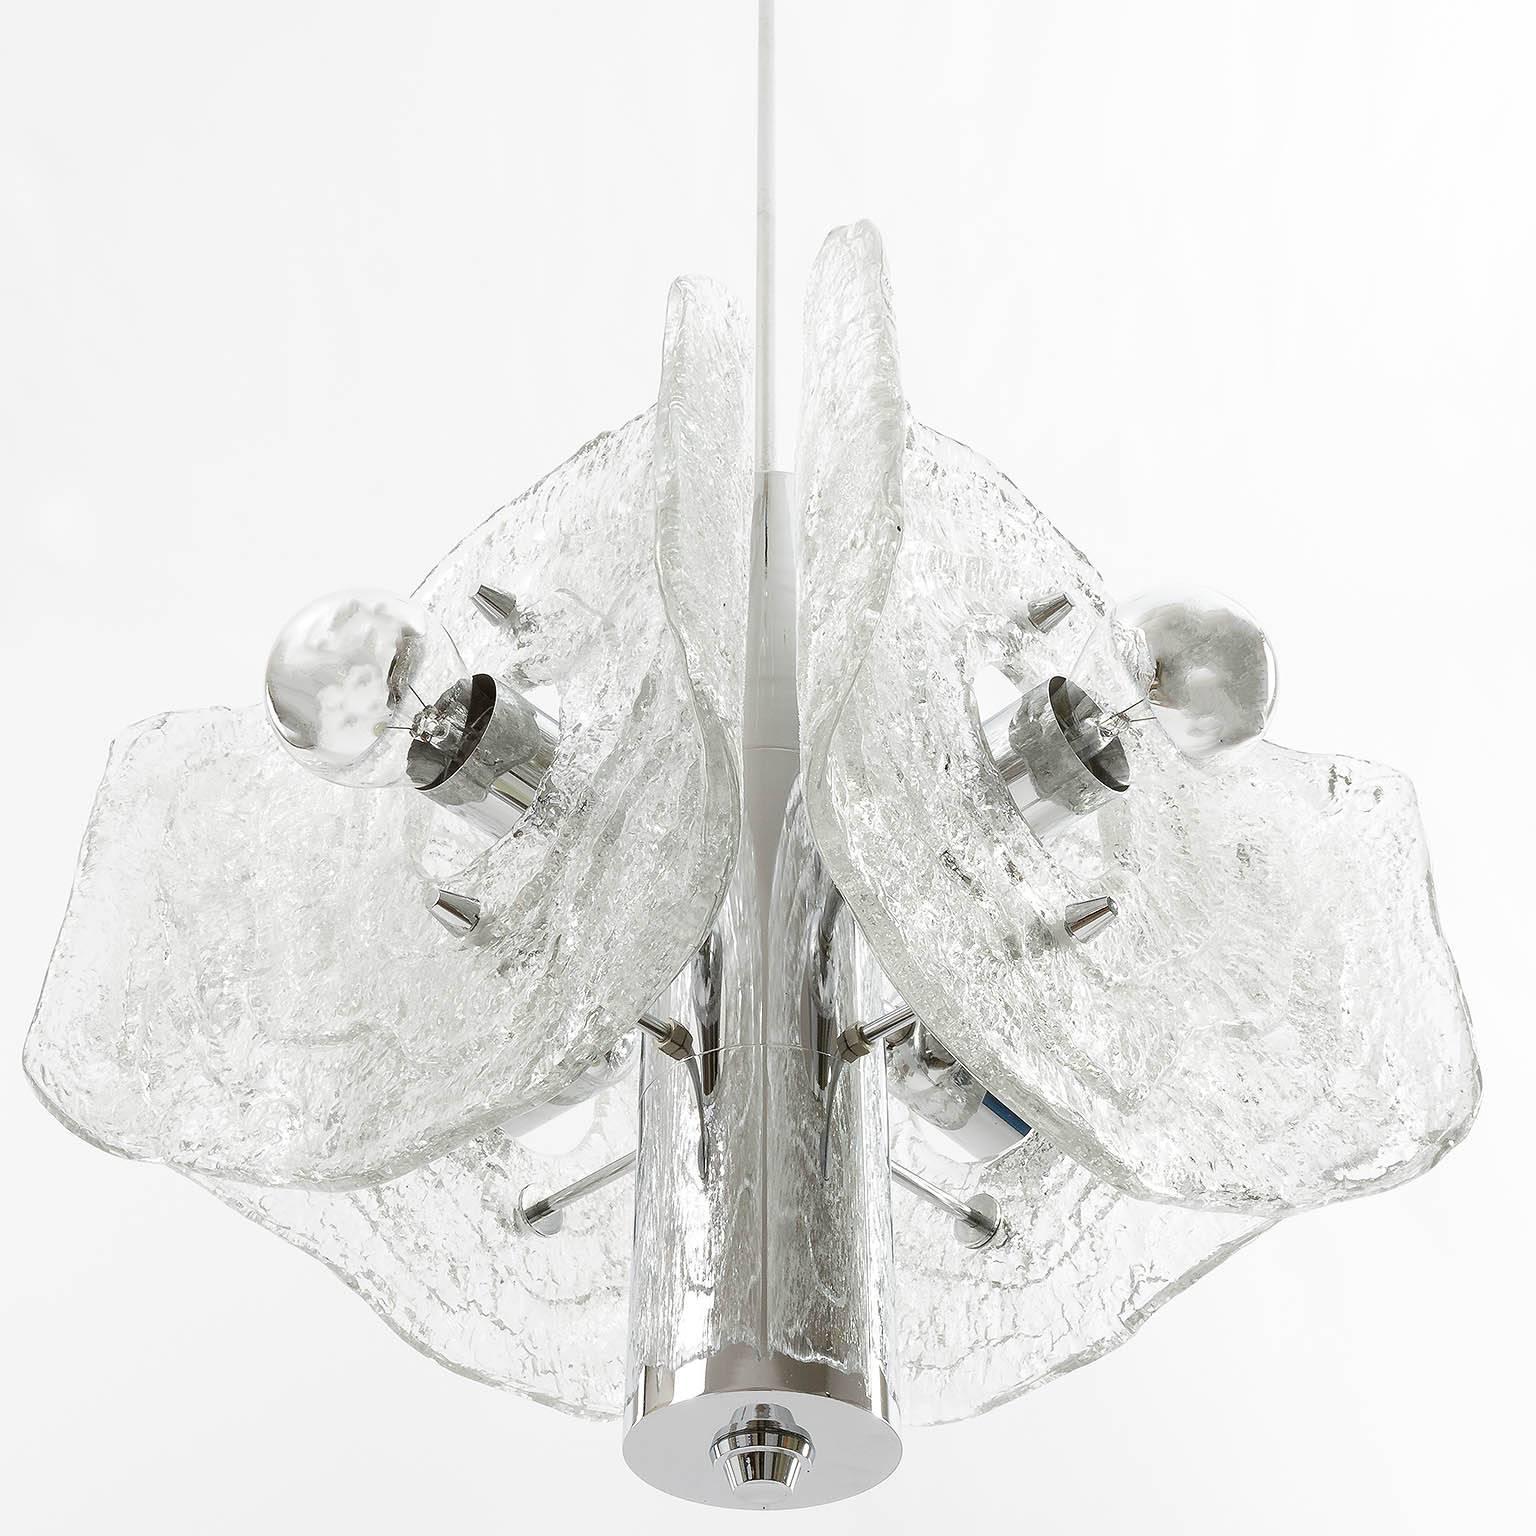 A Mid-Century chandelier / pendant light by Kalmar, manufactured in the 1970s. A chrome frame holds four frosted glasses in the form of leaves. It takes four medium screw base bulbs and works well with mirrored or clear bulbs. 

Diameter: 20